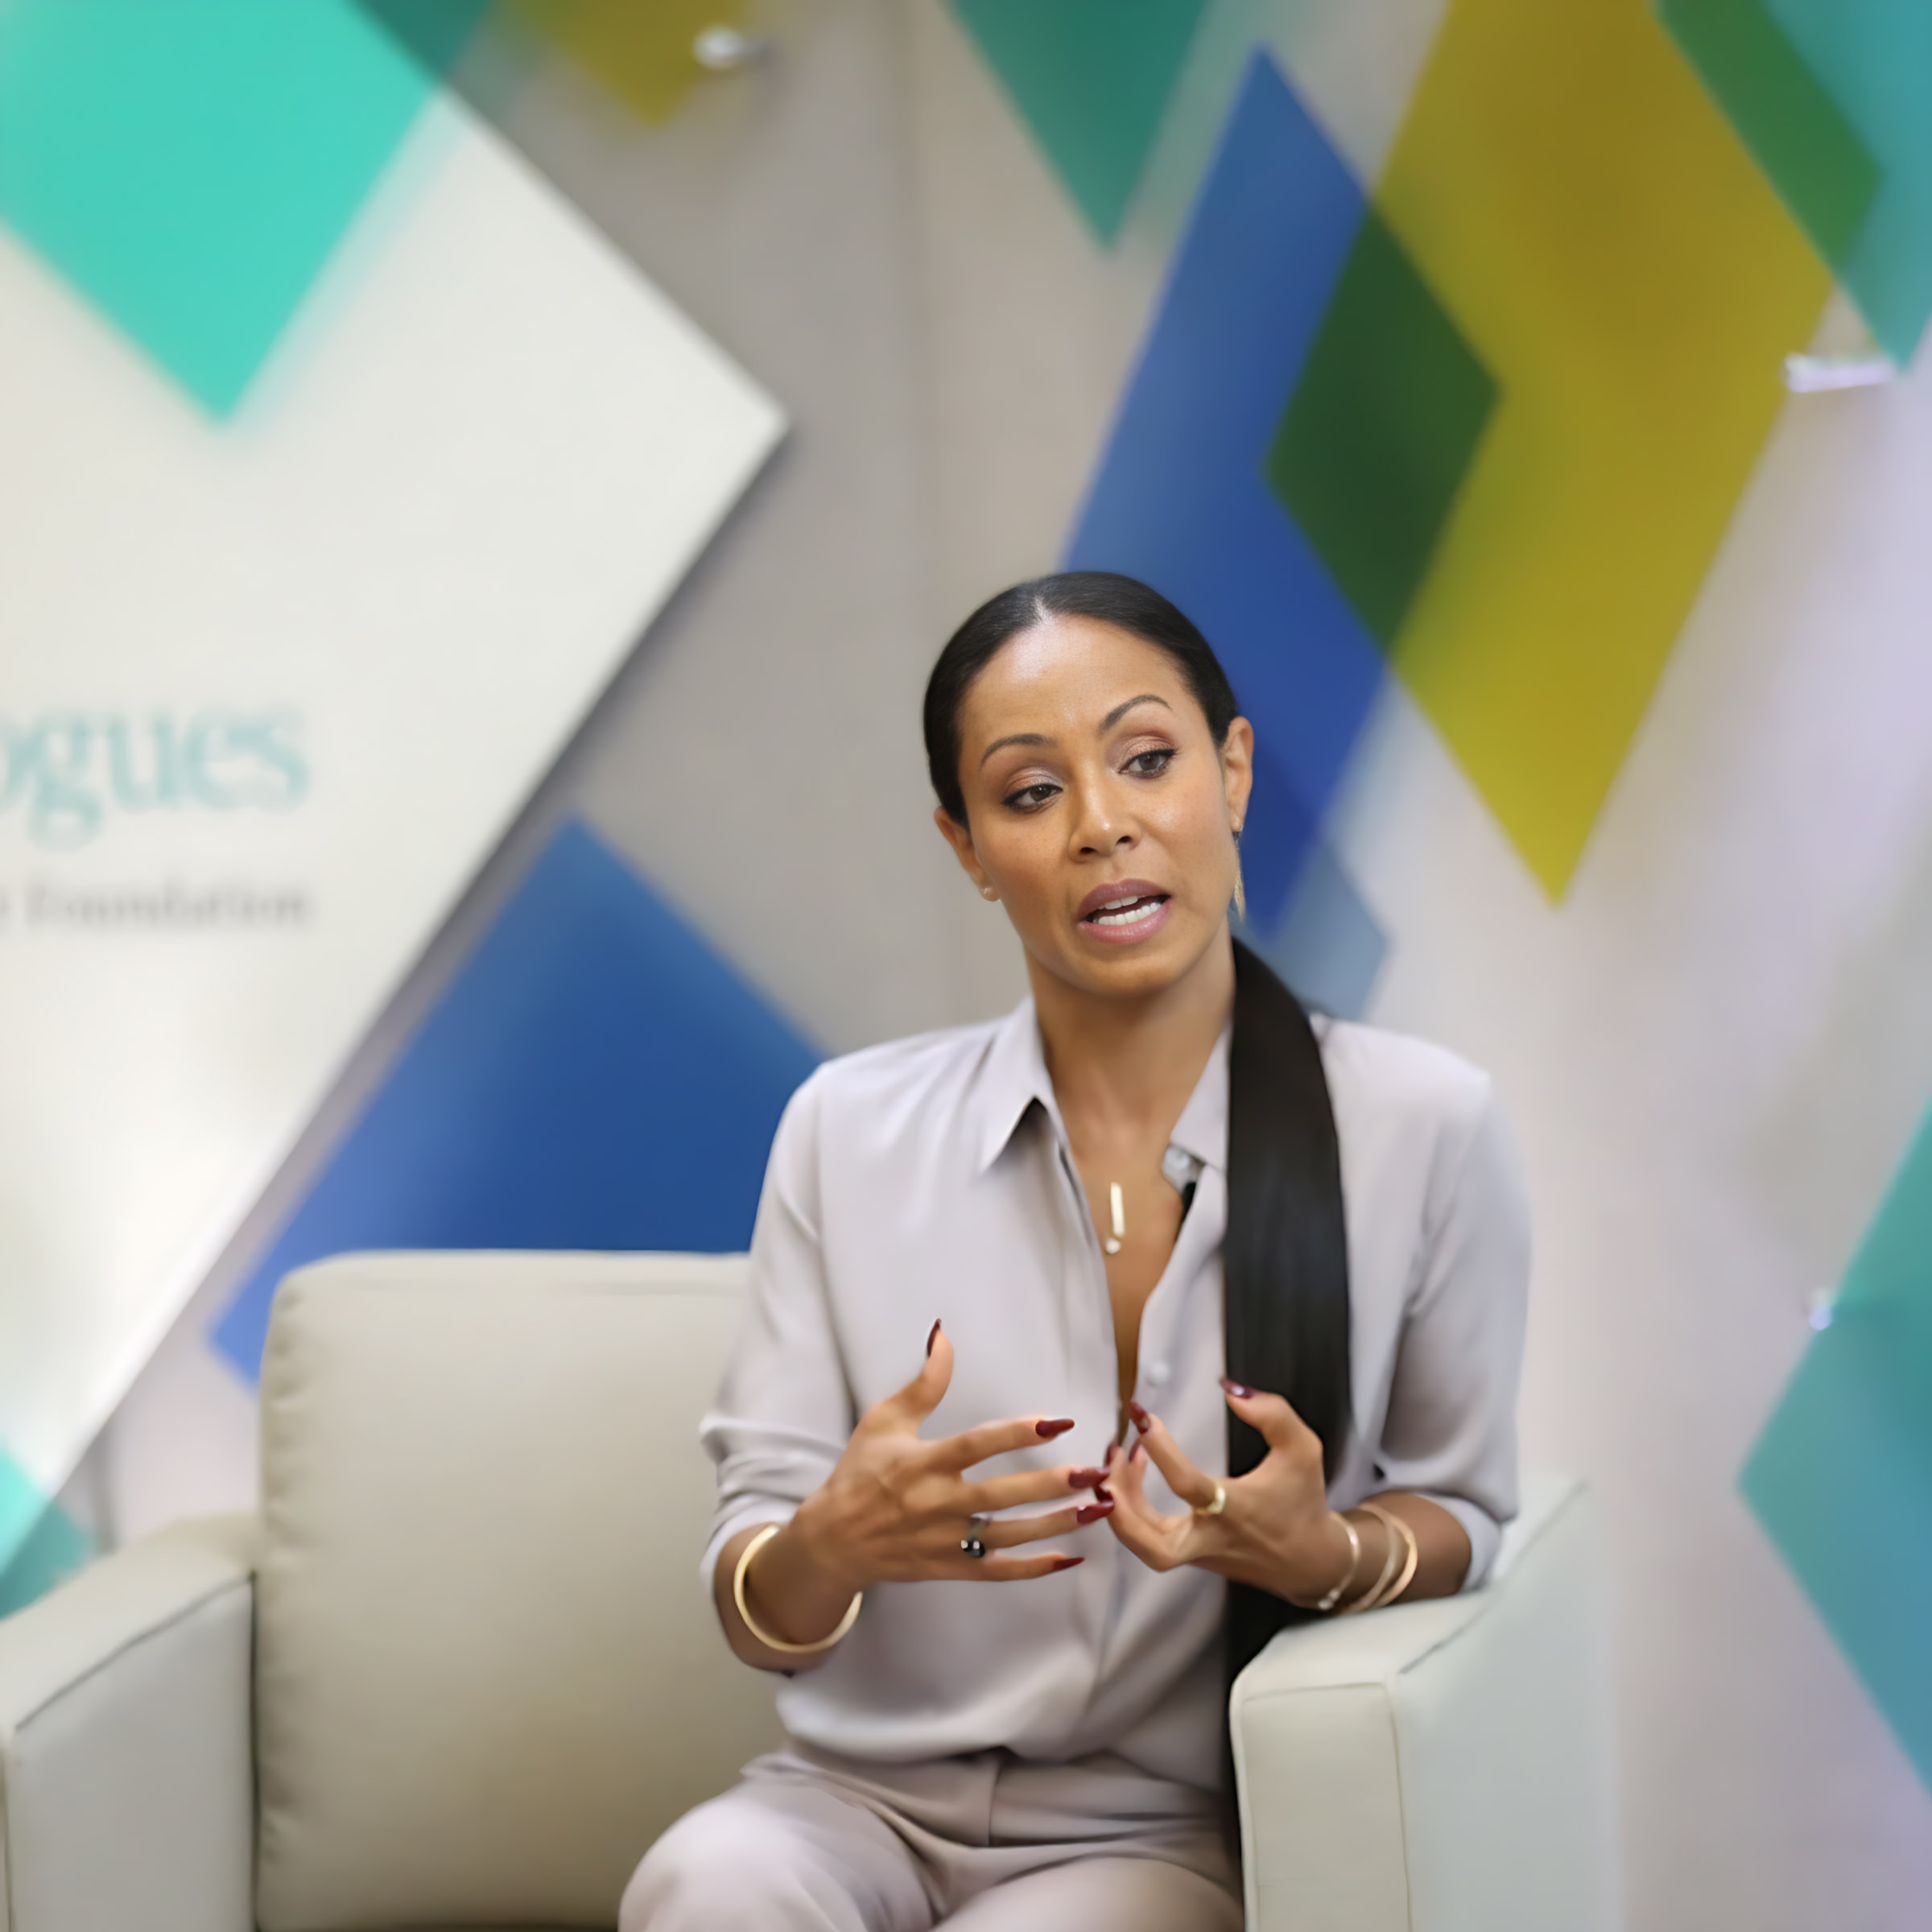 Jada Pinkett Smith speaking at the Rockefeller Foundation's Insight Dialogues event